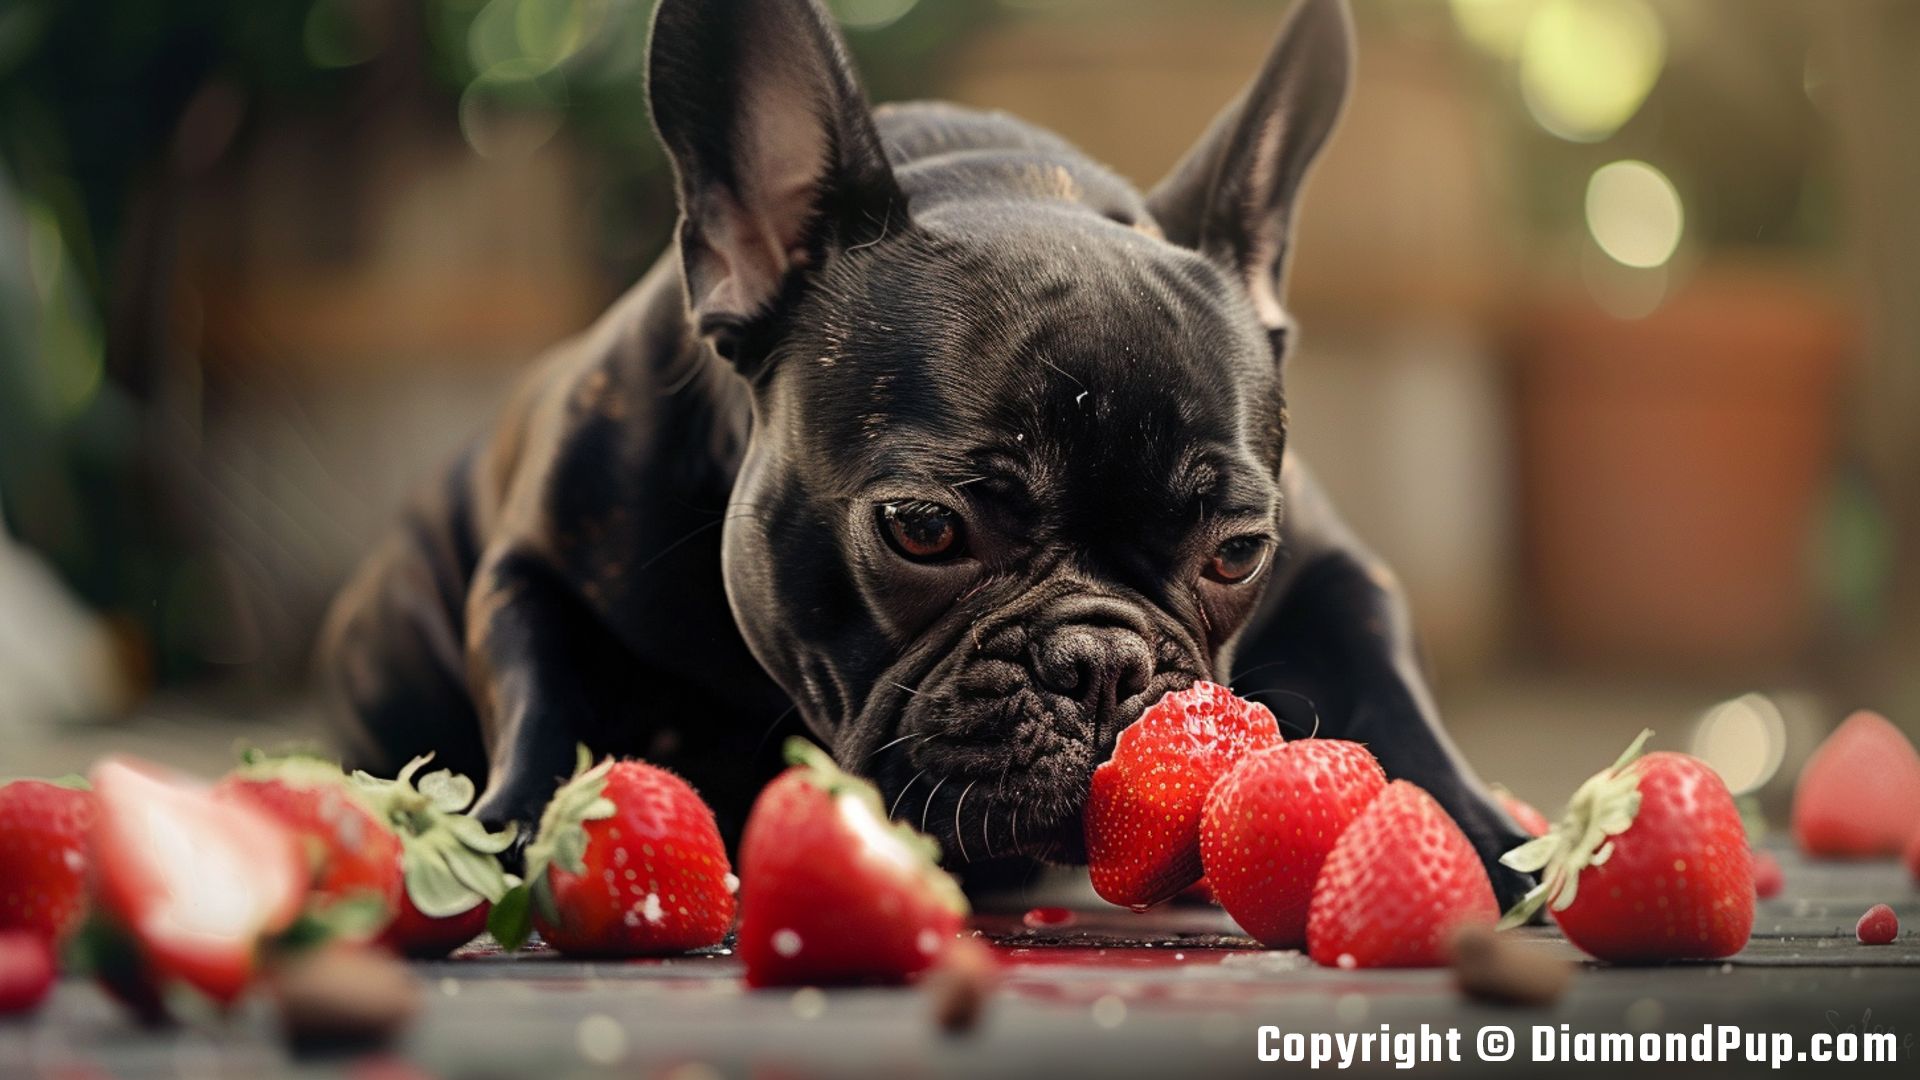 Photo of a Playful French Bulldog Snacking on Strawberries